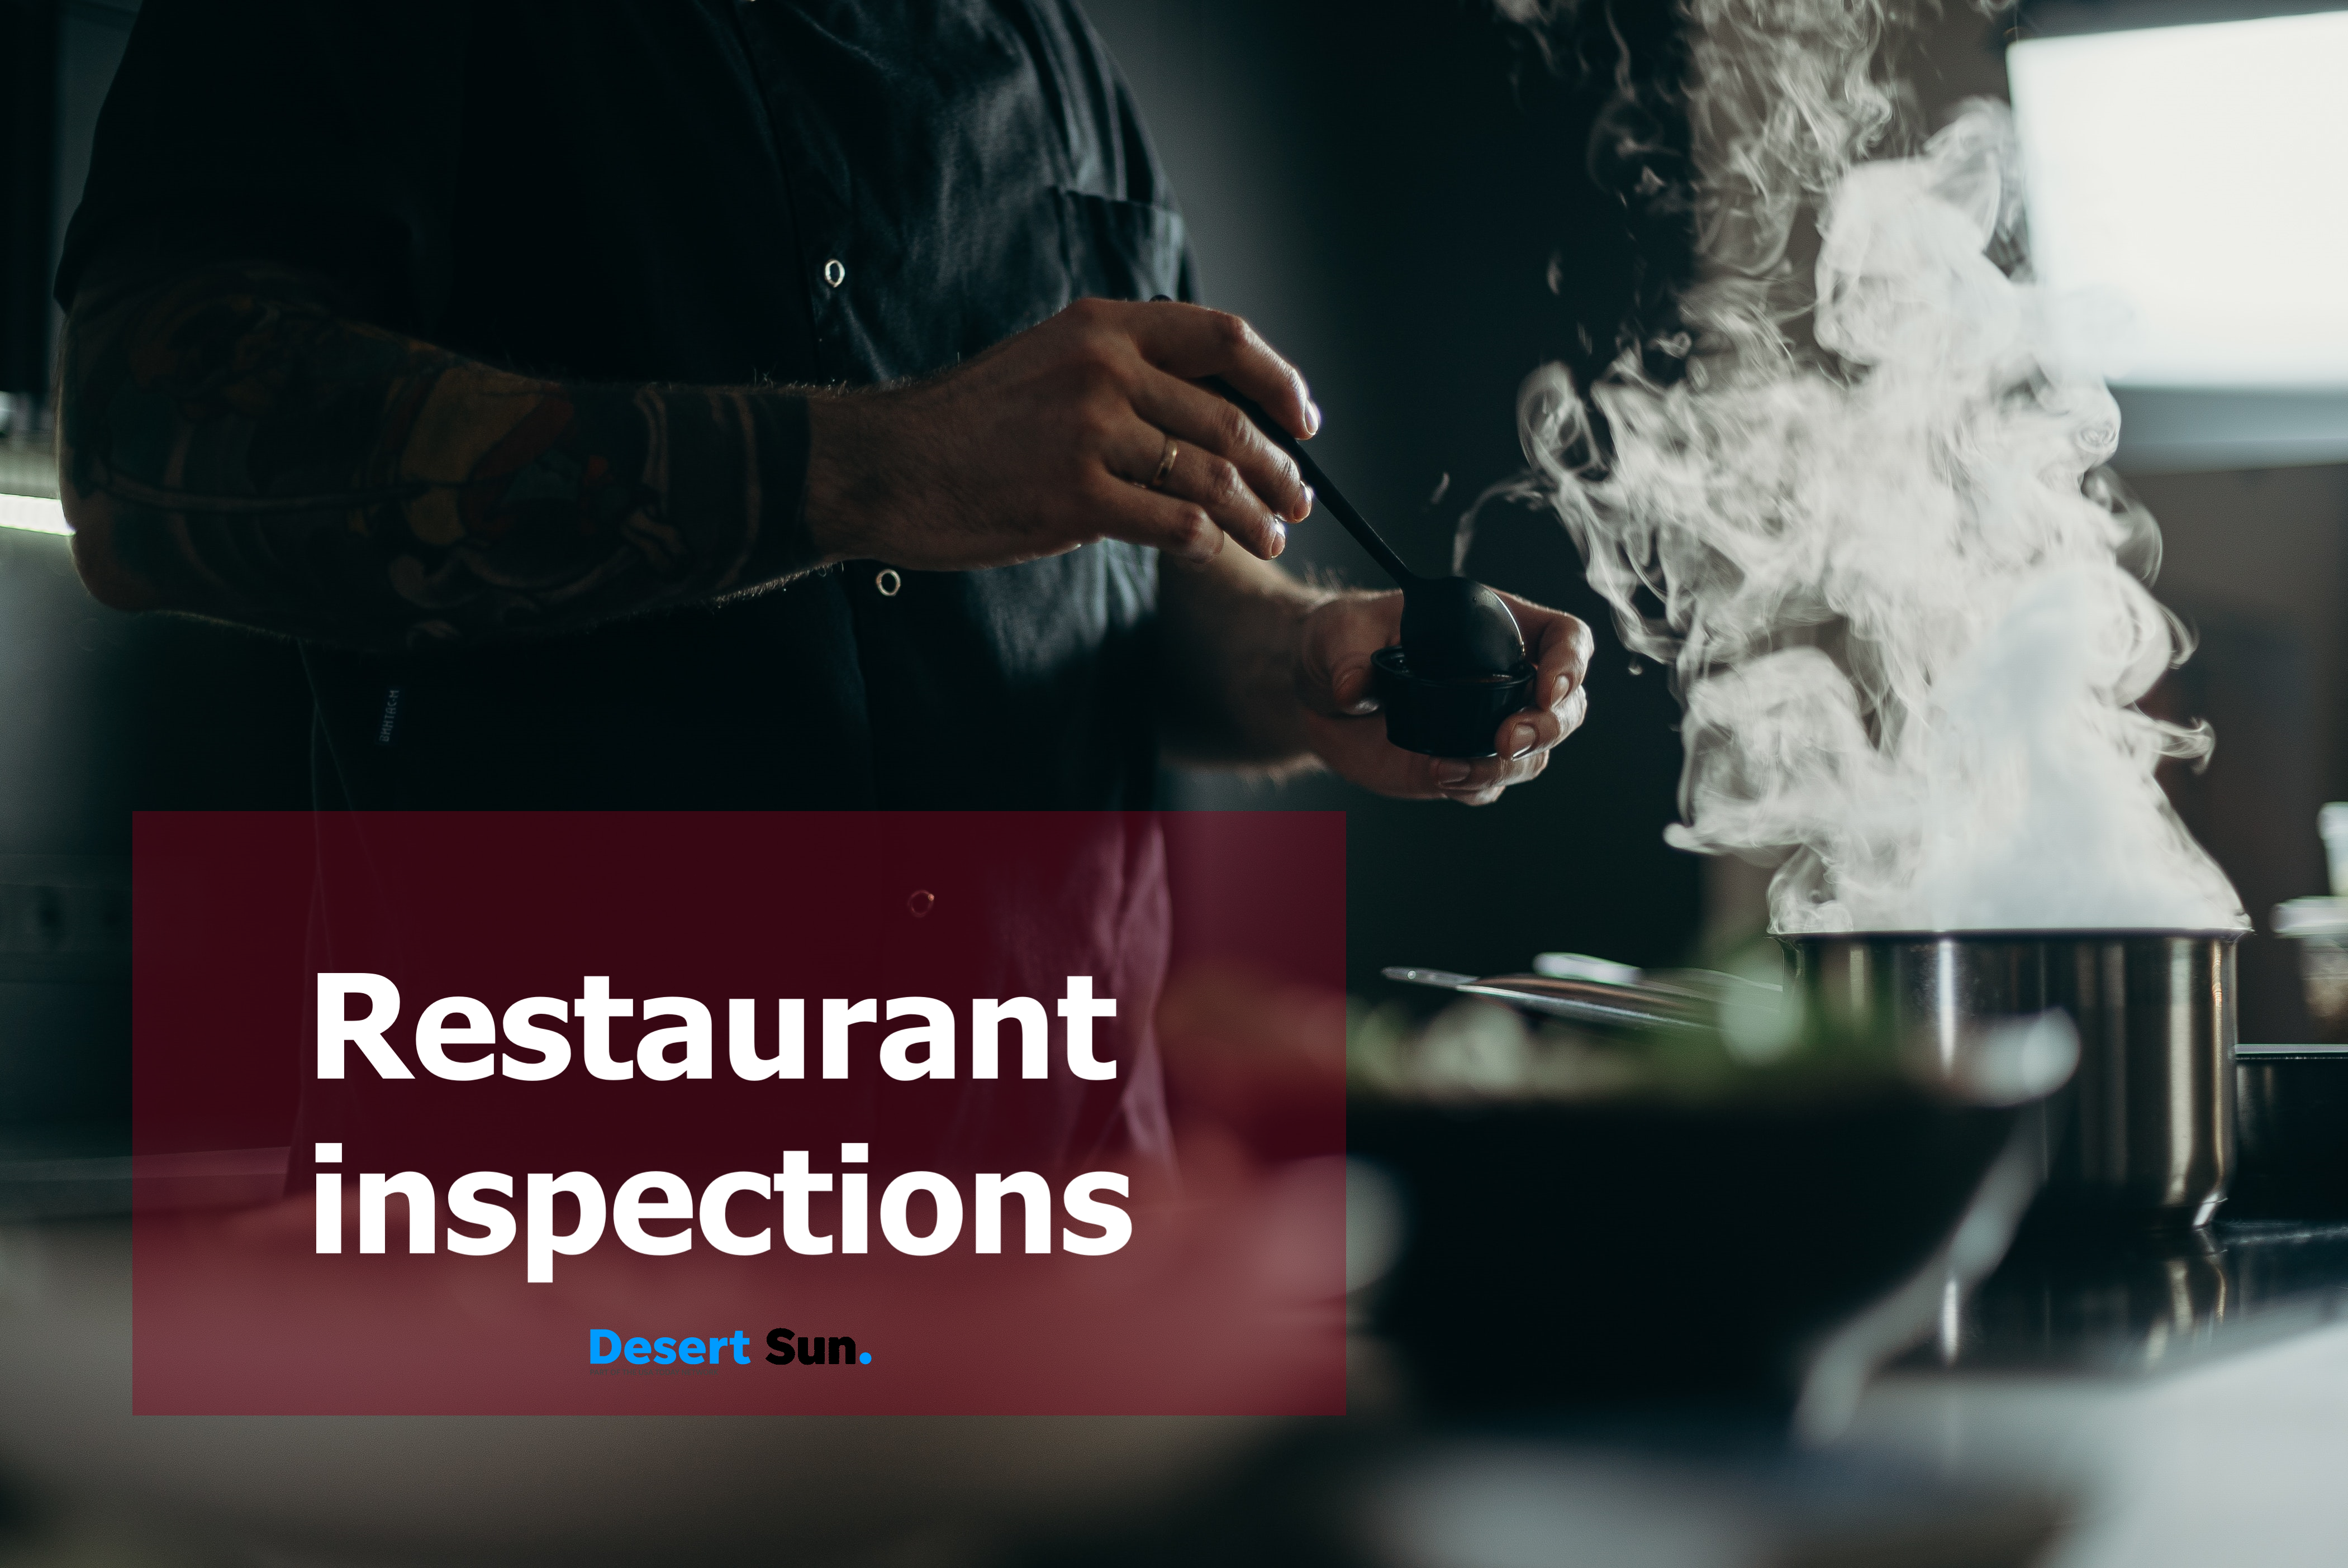 Restaurant inspections: Rat droppings close Rancho Mirage eatery; Palm Springs spot reopens